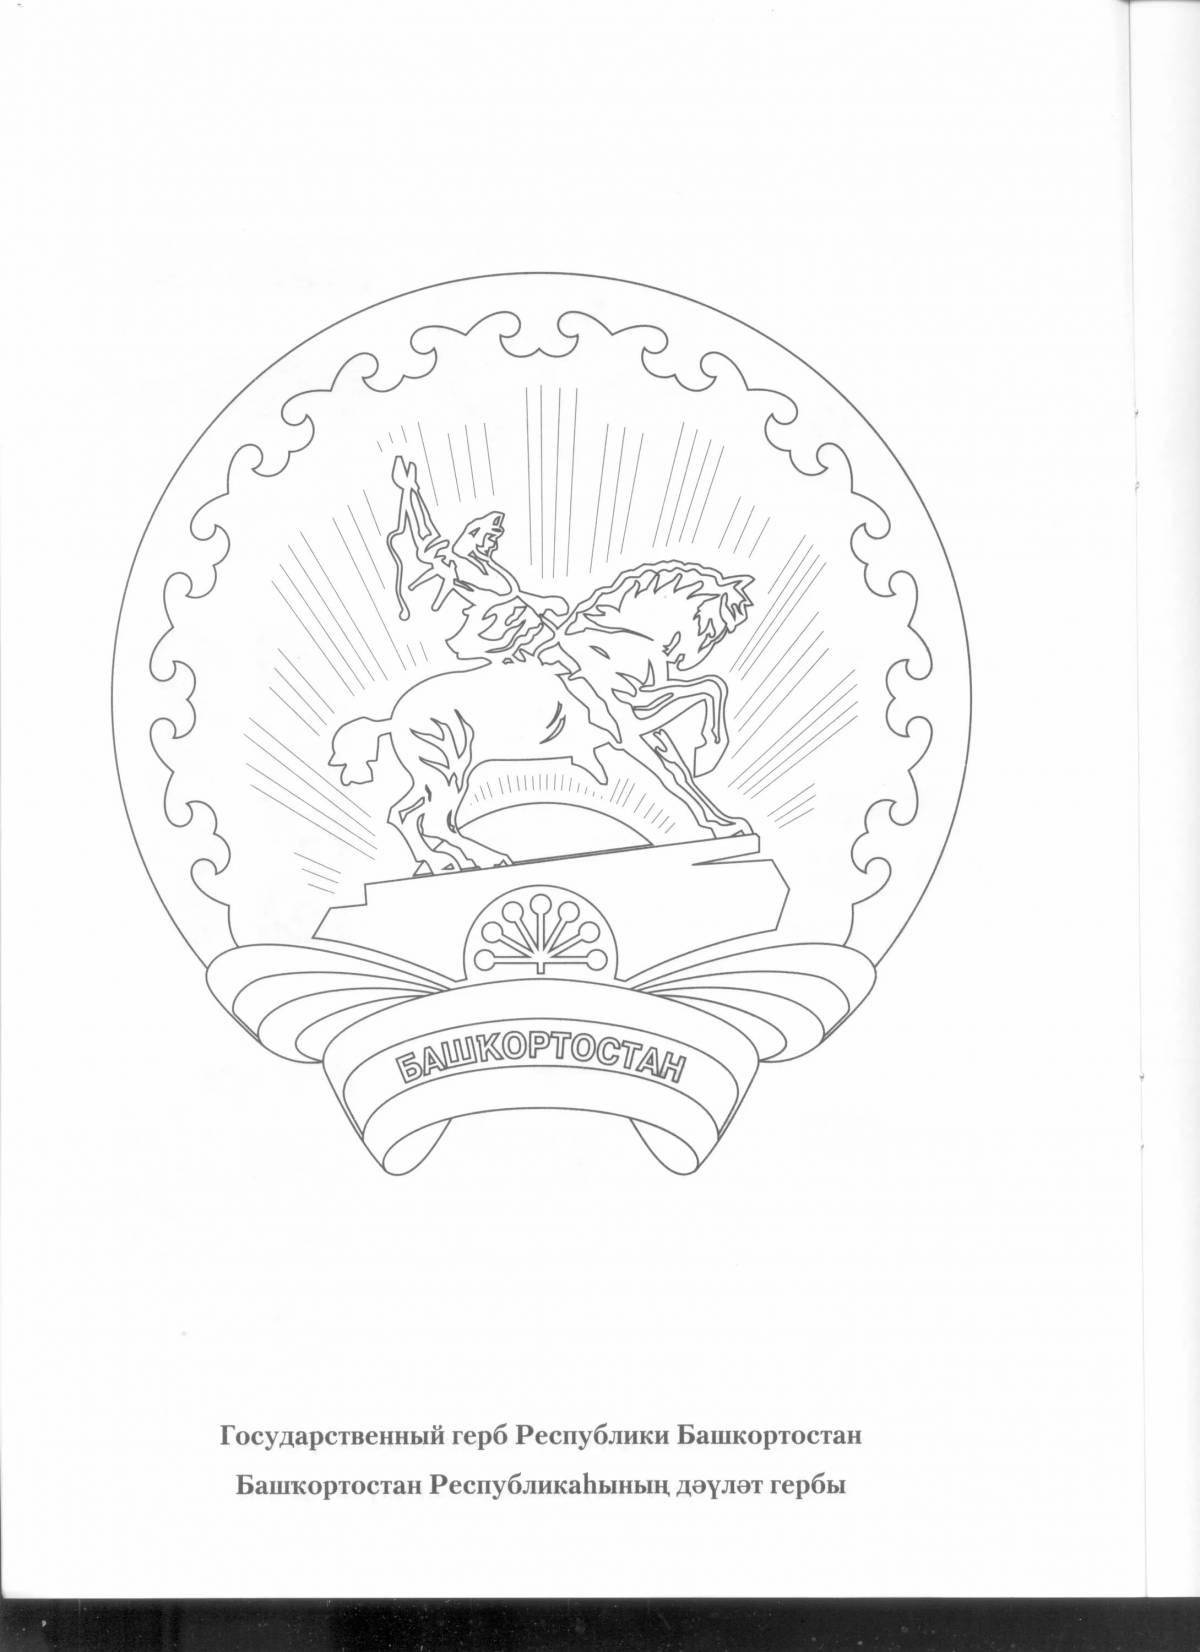 Exquisite coat of arms coloring page